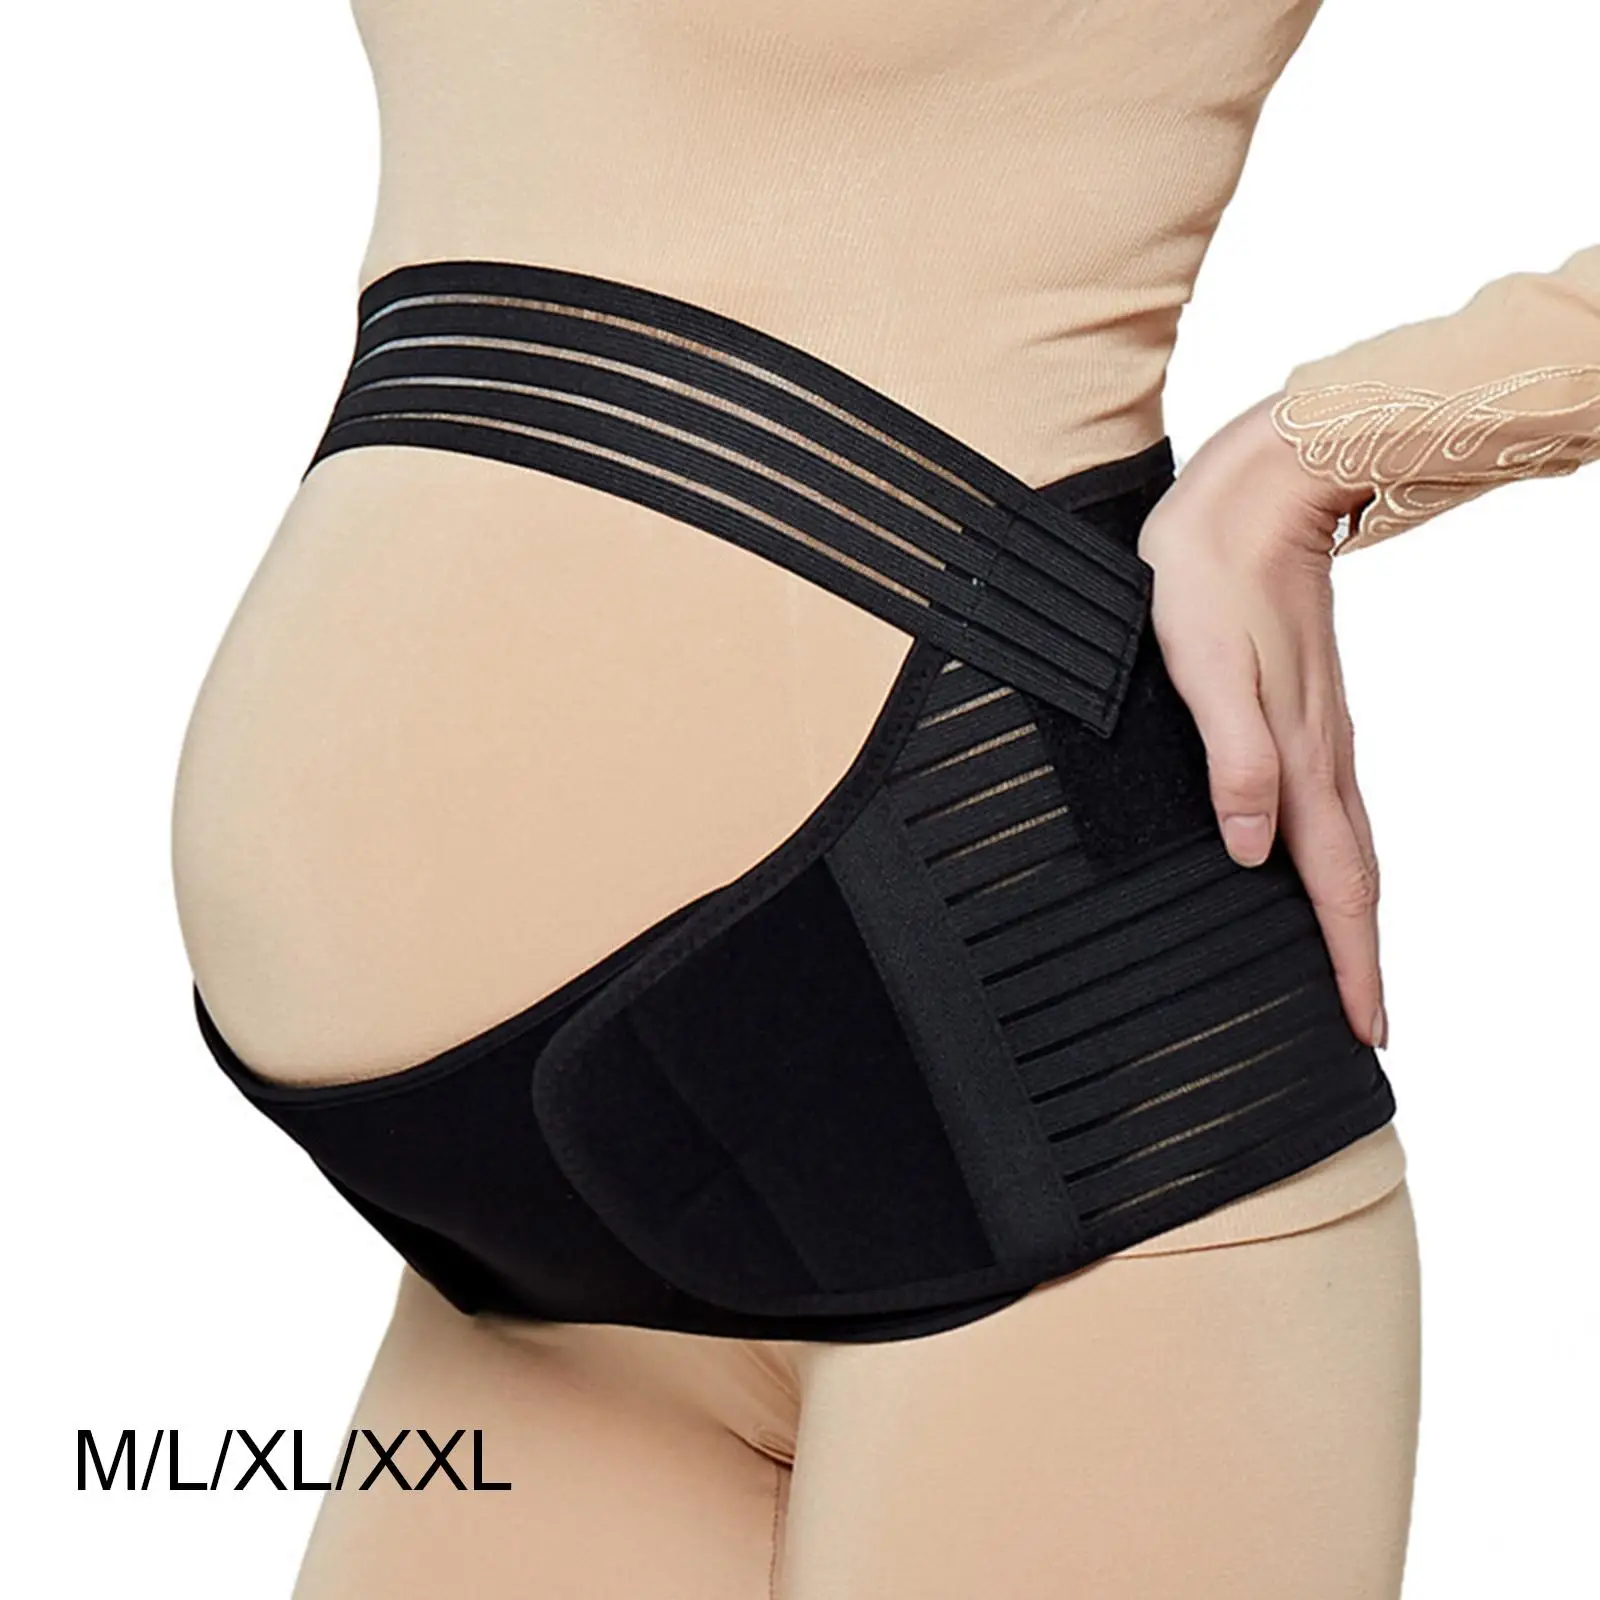 Pregnancy Supporting Band Belly Brace Black, Adjustable Convenient Comfortable